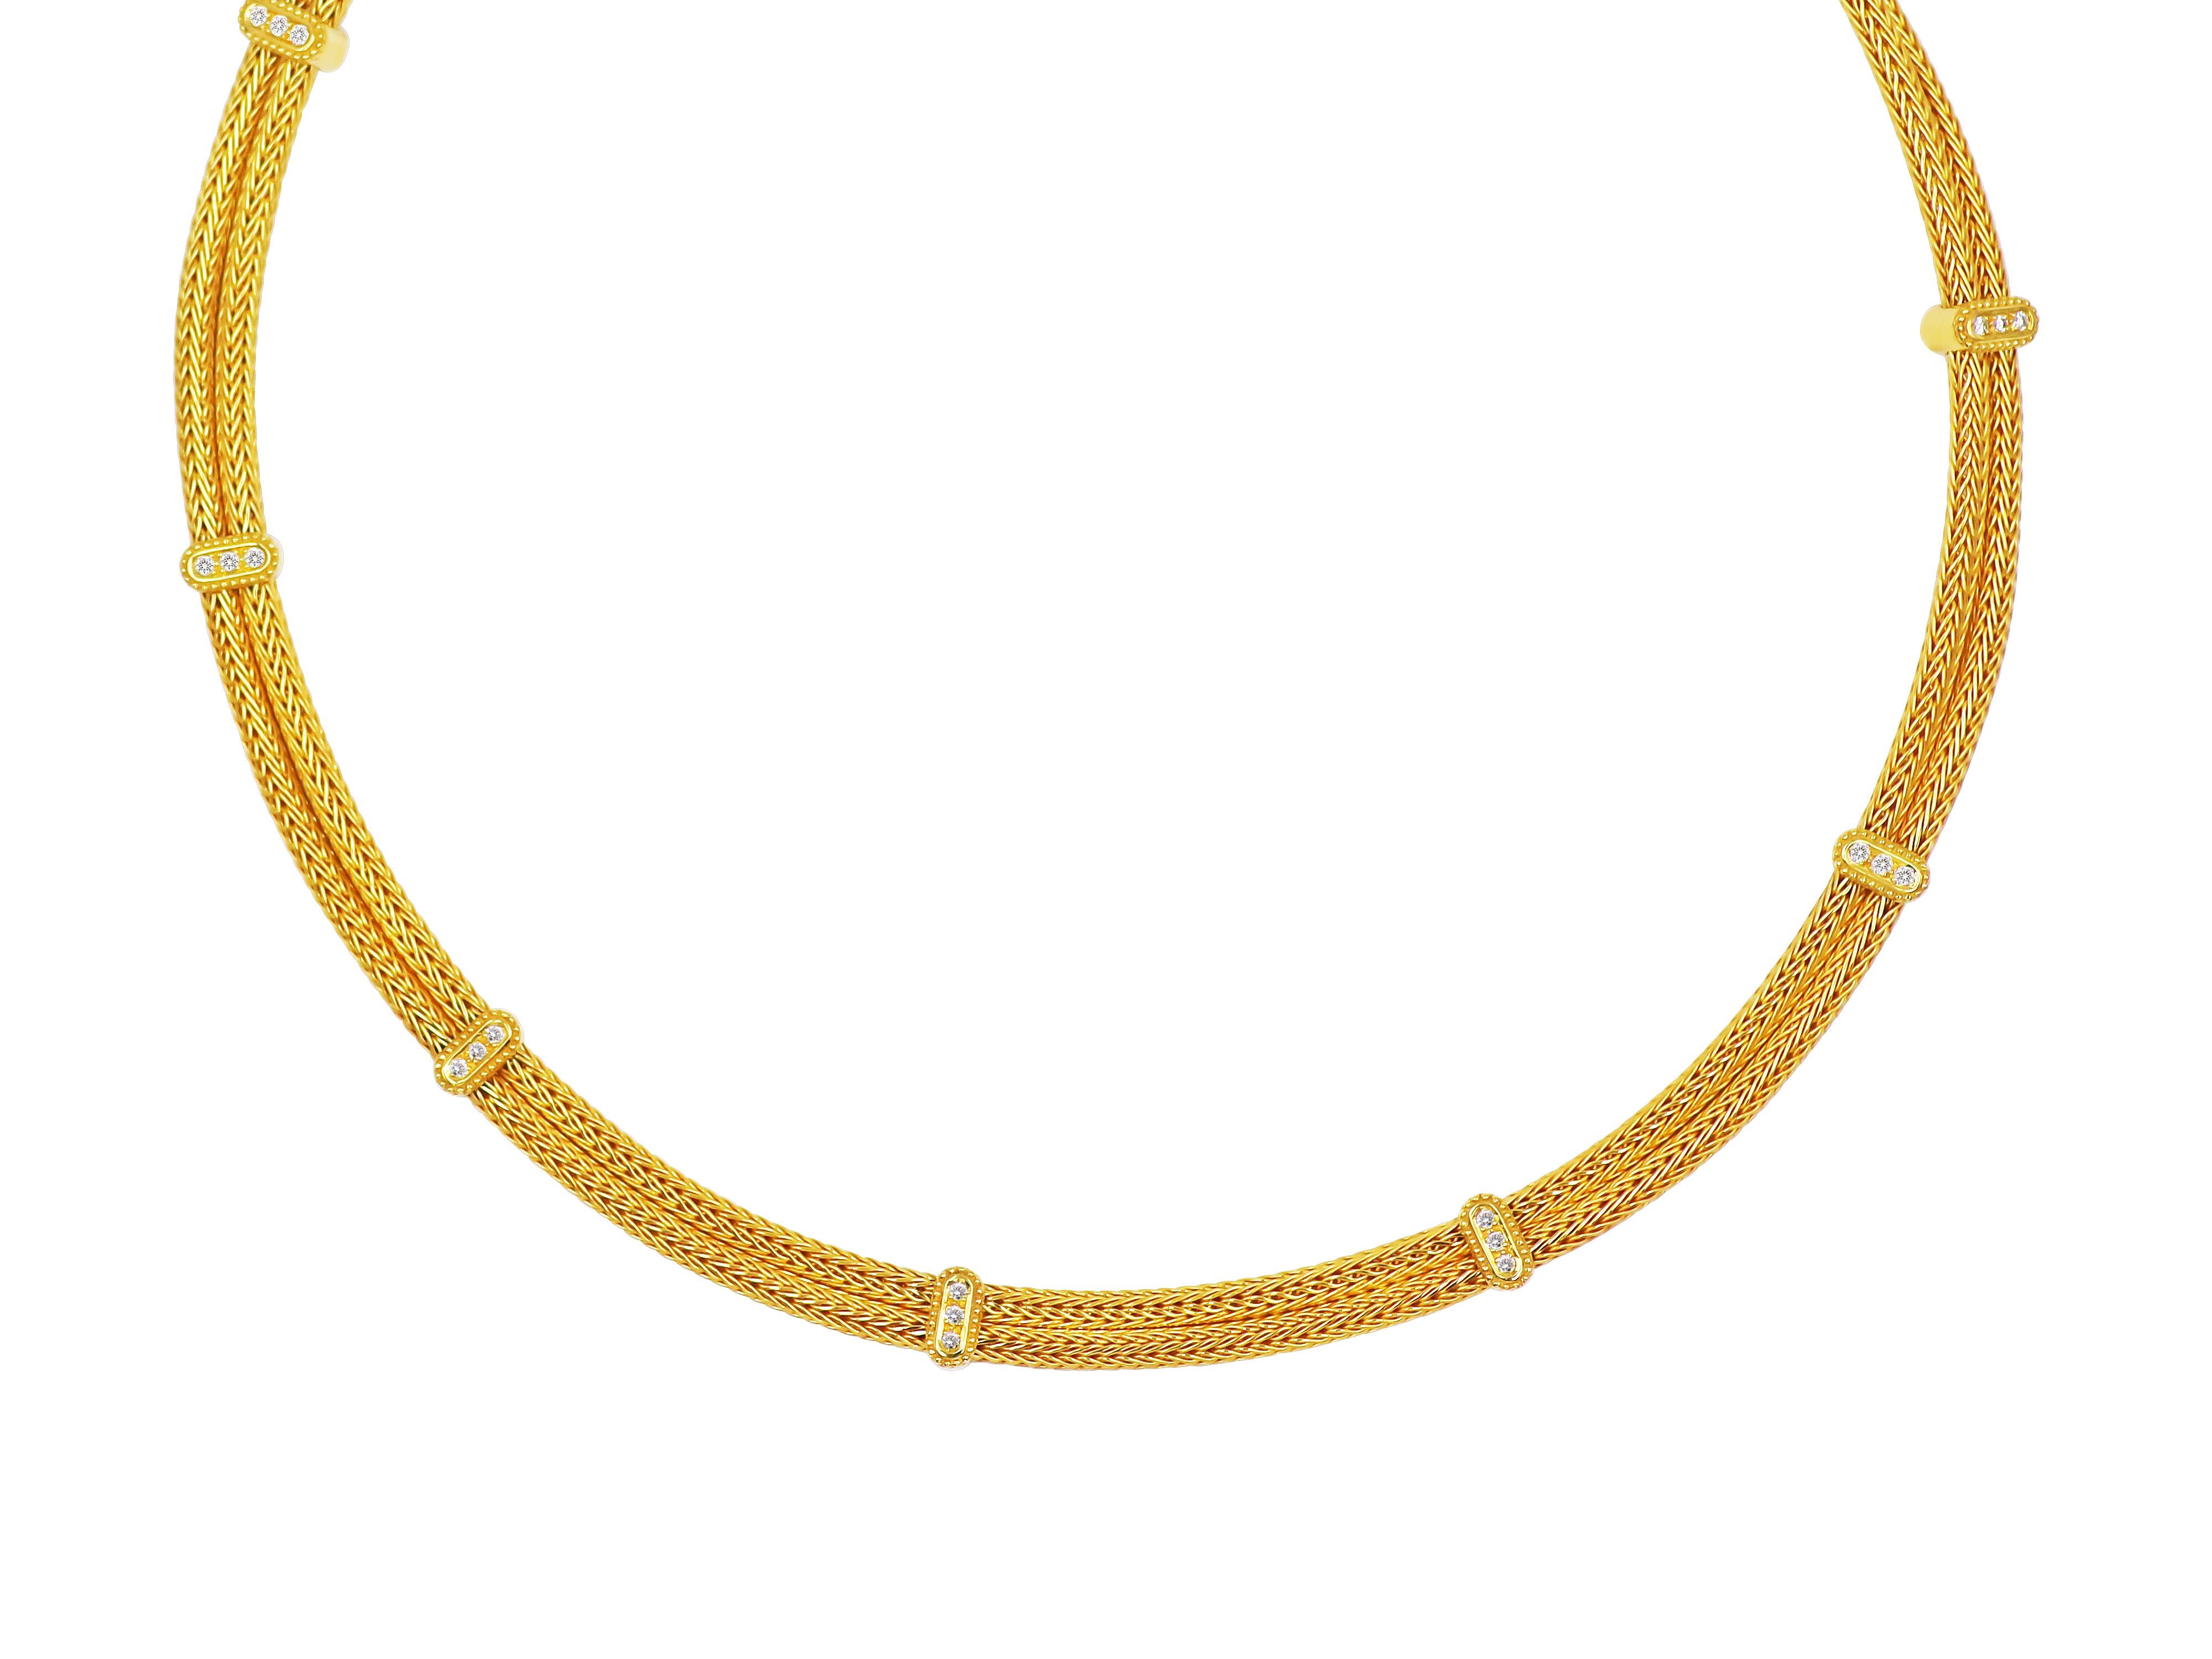 Knitted necklace from Dimos collection with double rope and diamond bars.  A world known workmanship of ours, with hours of knitting wire ending up in the beautiful double safety box clasp decorated with gold bars sets with 0.40 brilliant cut